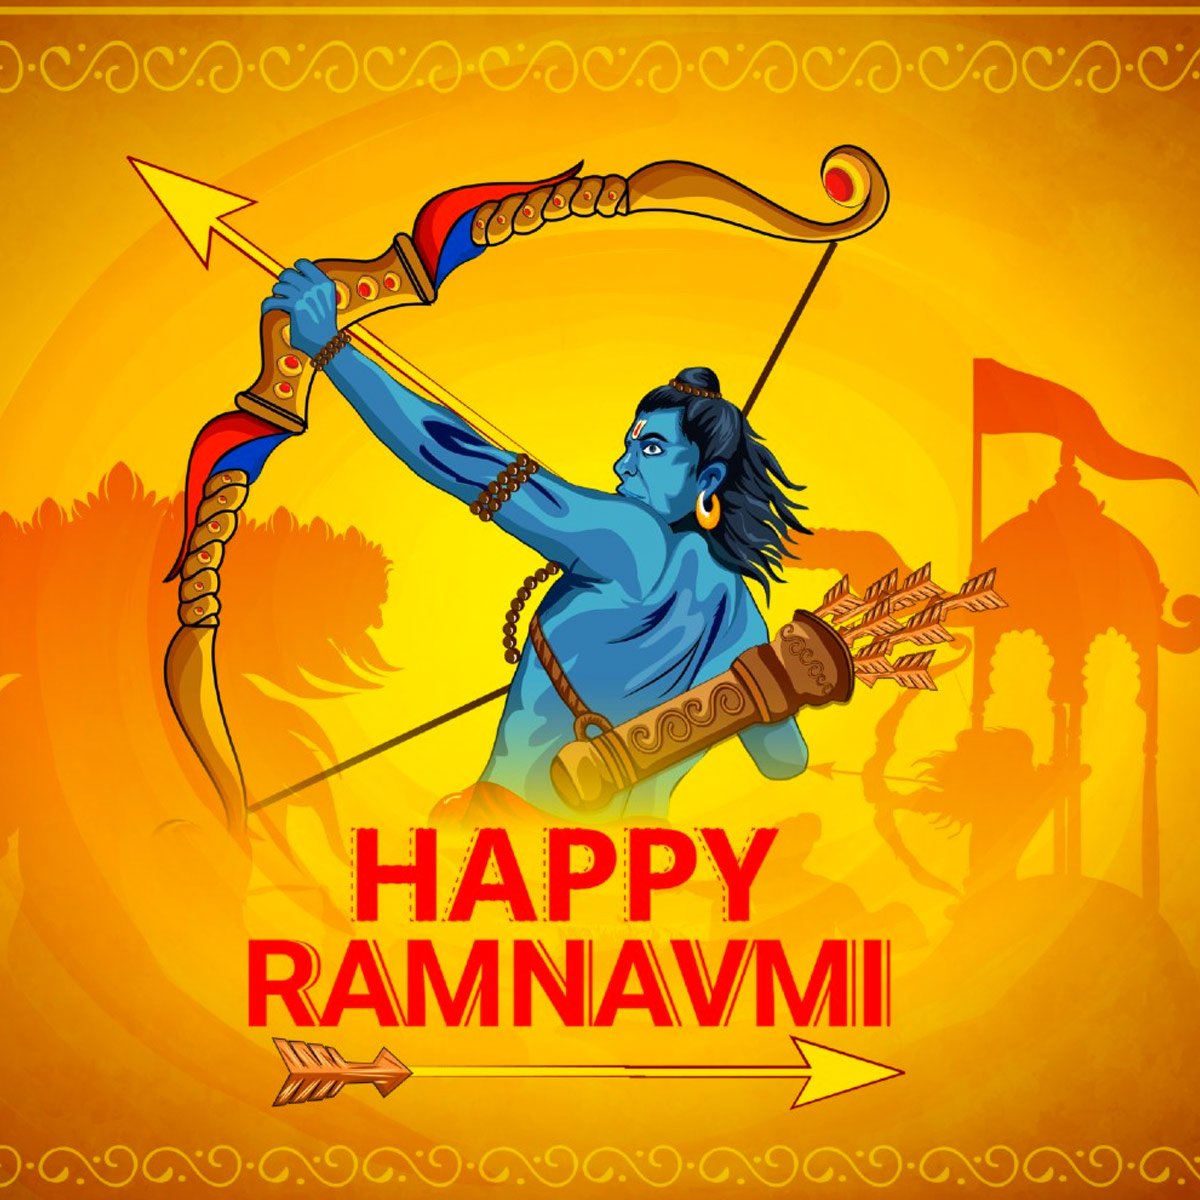 Ram Navami is a Hindu festival celebrating the birth of Lord Rama, son of King Dasaratha and Queen Kaushalya of Ayodhya. Rama is the seventh incarnation of Lord Vishnu. This auspicious day falls on the ninth tithi of Shuklapaksha in the Chaitra month of the Hindu calendar.